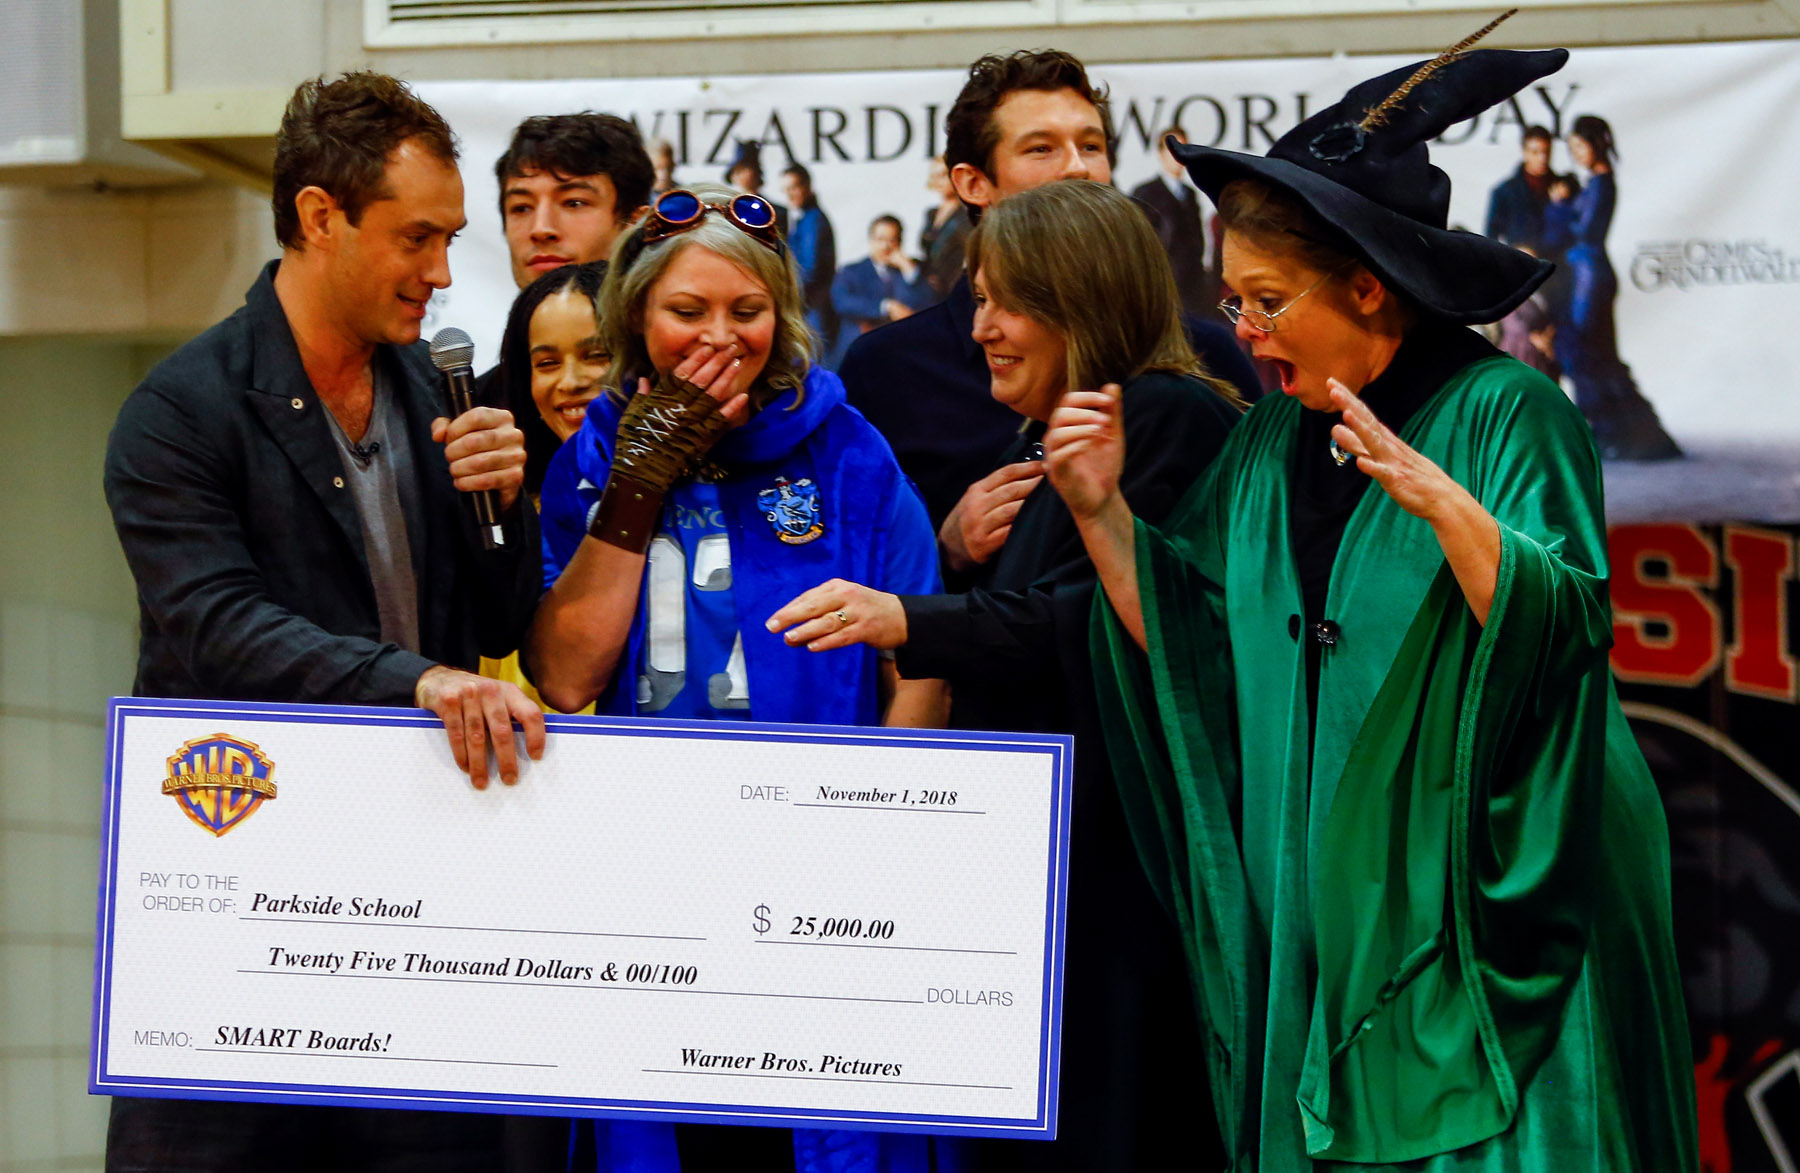 Jude Law from “Fantastic Beasts: The Crimes of Grindelwald” presents a check to teachers Jacy Douglas, Tracey Jones, and Karen Moon to help celebrate Wizarding World Day at Parkside Middle School in Baileyton, AL.  (Photo by Butch Dill/Getty Images)